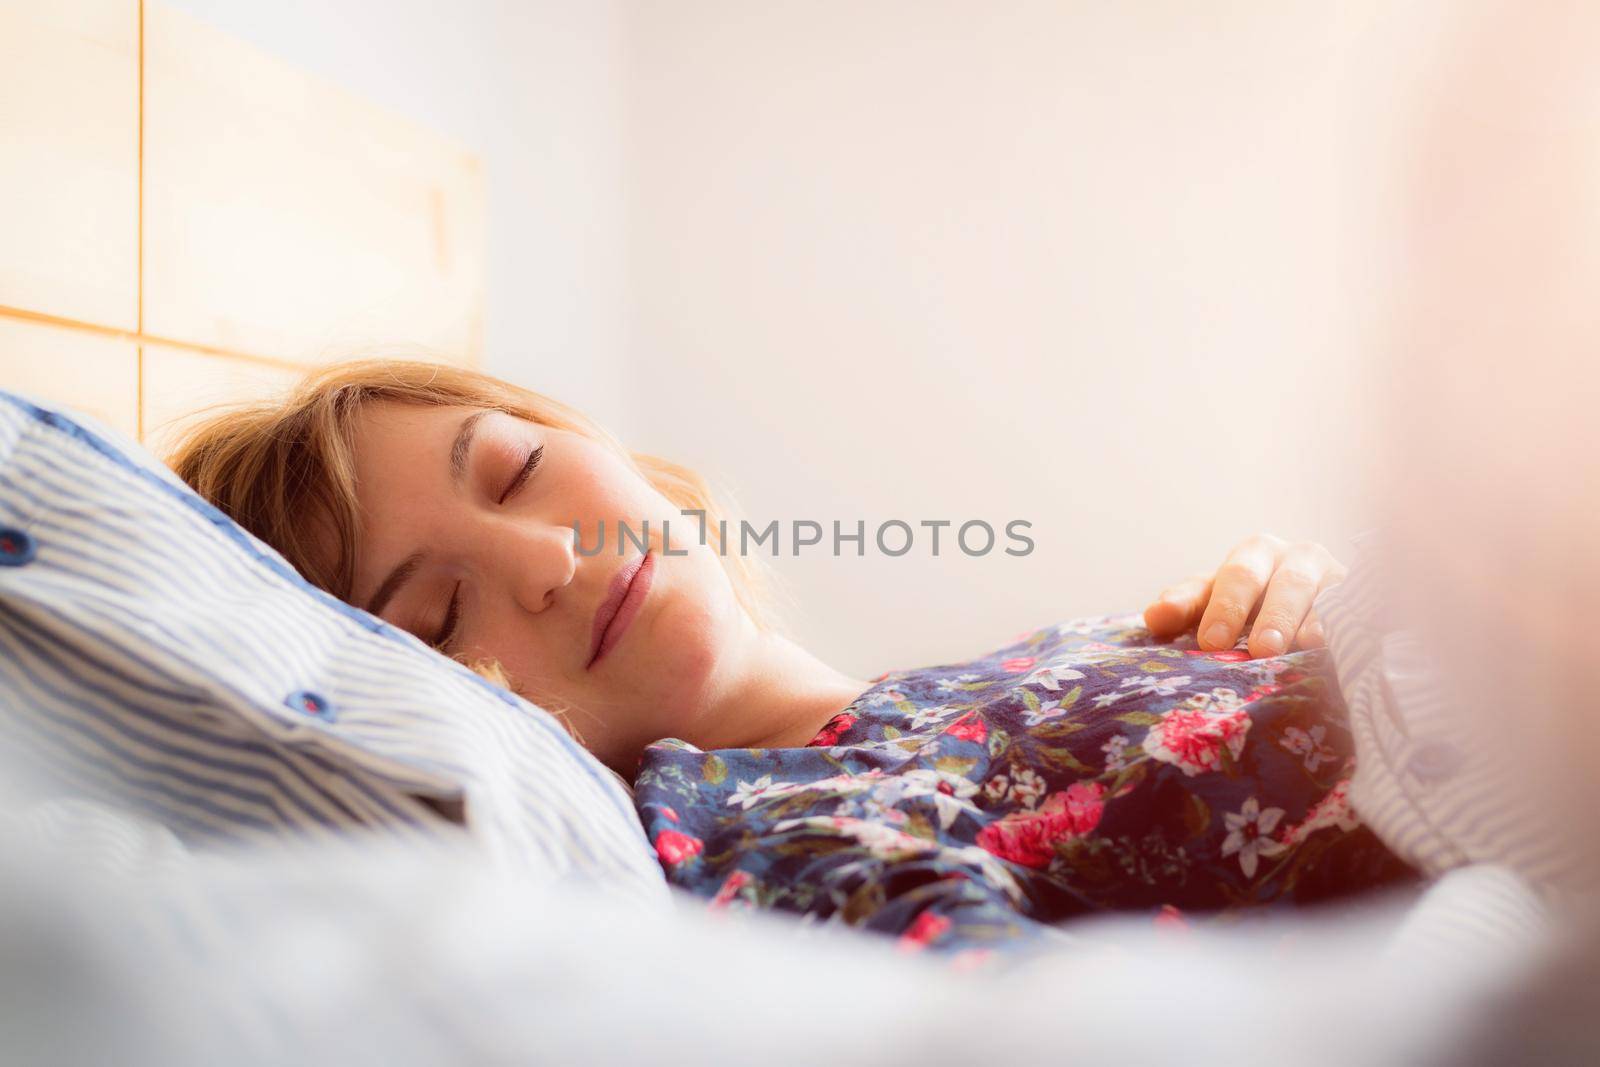 Restful sleep: Young female is sleeping in her bed, close up by Daxenbichler